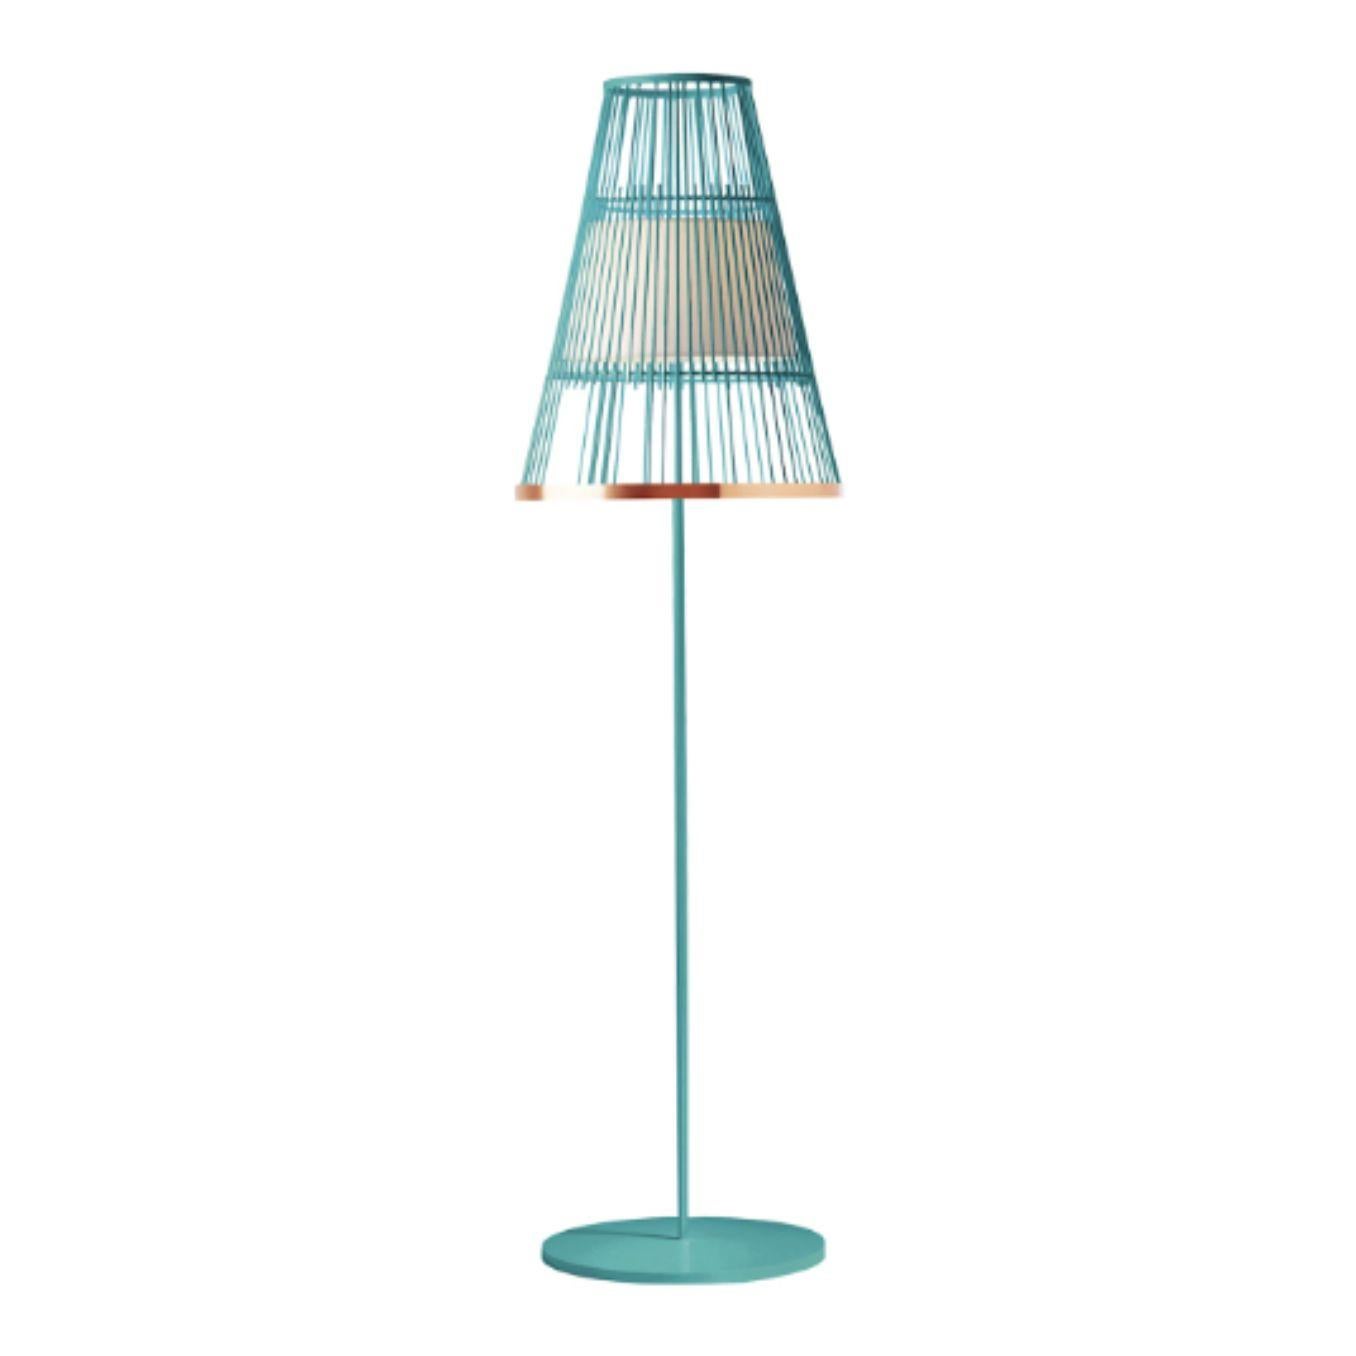 Mint Up floor lamp with copper ring by Dooq
Dimensions: W 47 x D 47 x H 170 cm
Materials: lacquered metal, polished or brushed metal, copper.
Abat-jour: cotton
Also available in different colors and materials. 

Information:
230V/50Hz
E27/1x20W